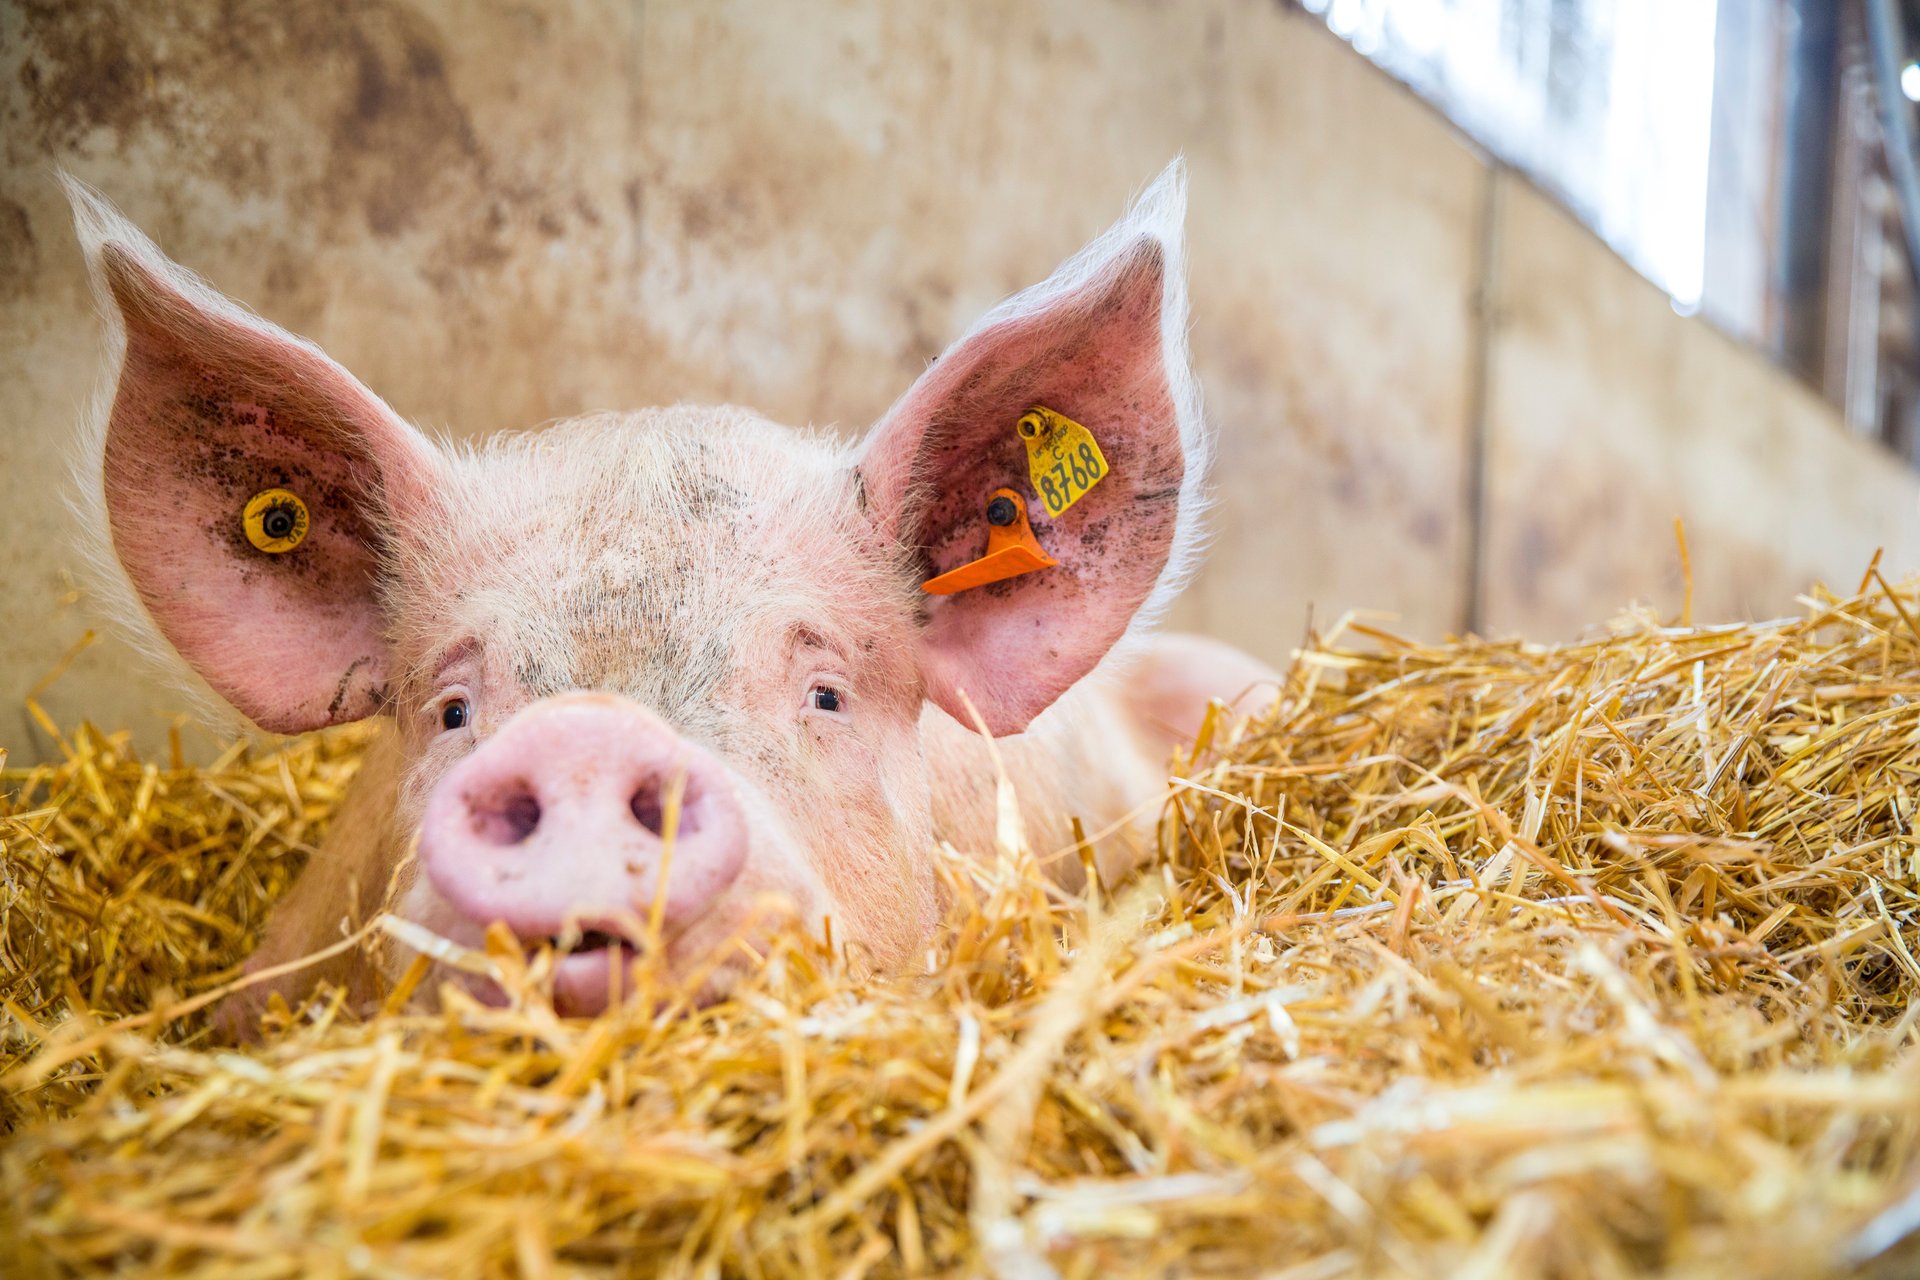 Pregnant pig resting in straw in a higher welfare indoor farm in the UK.